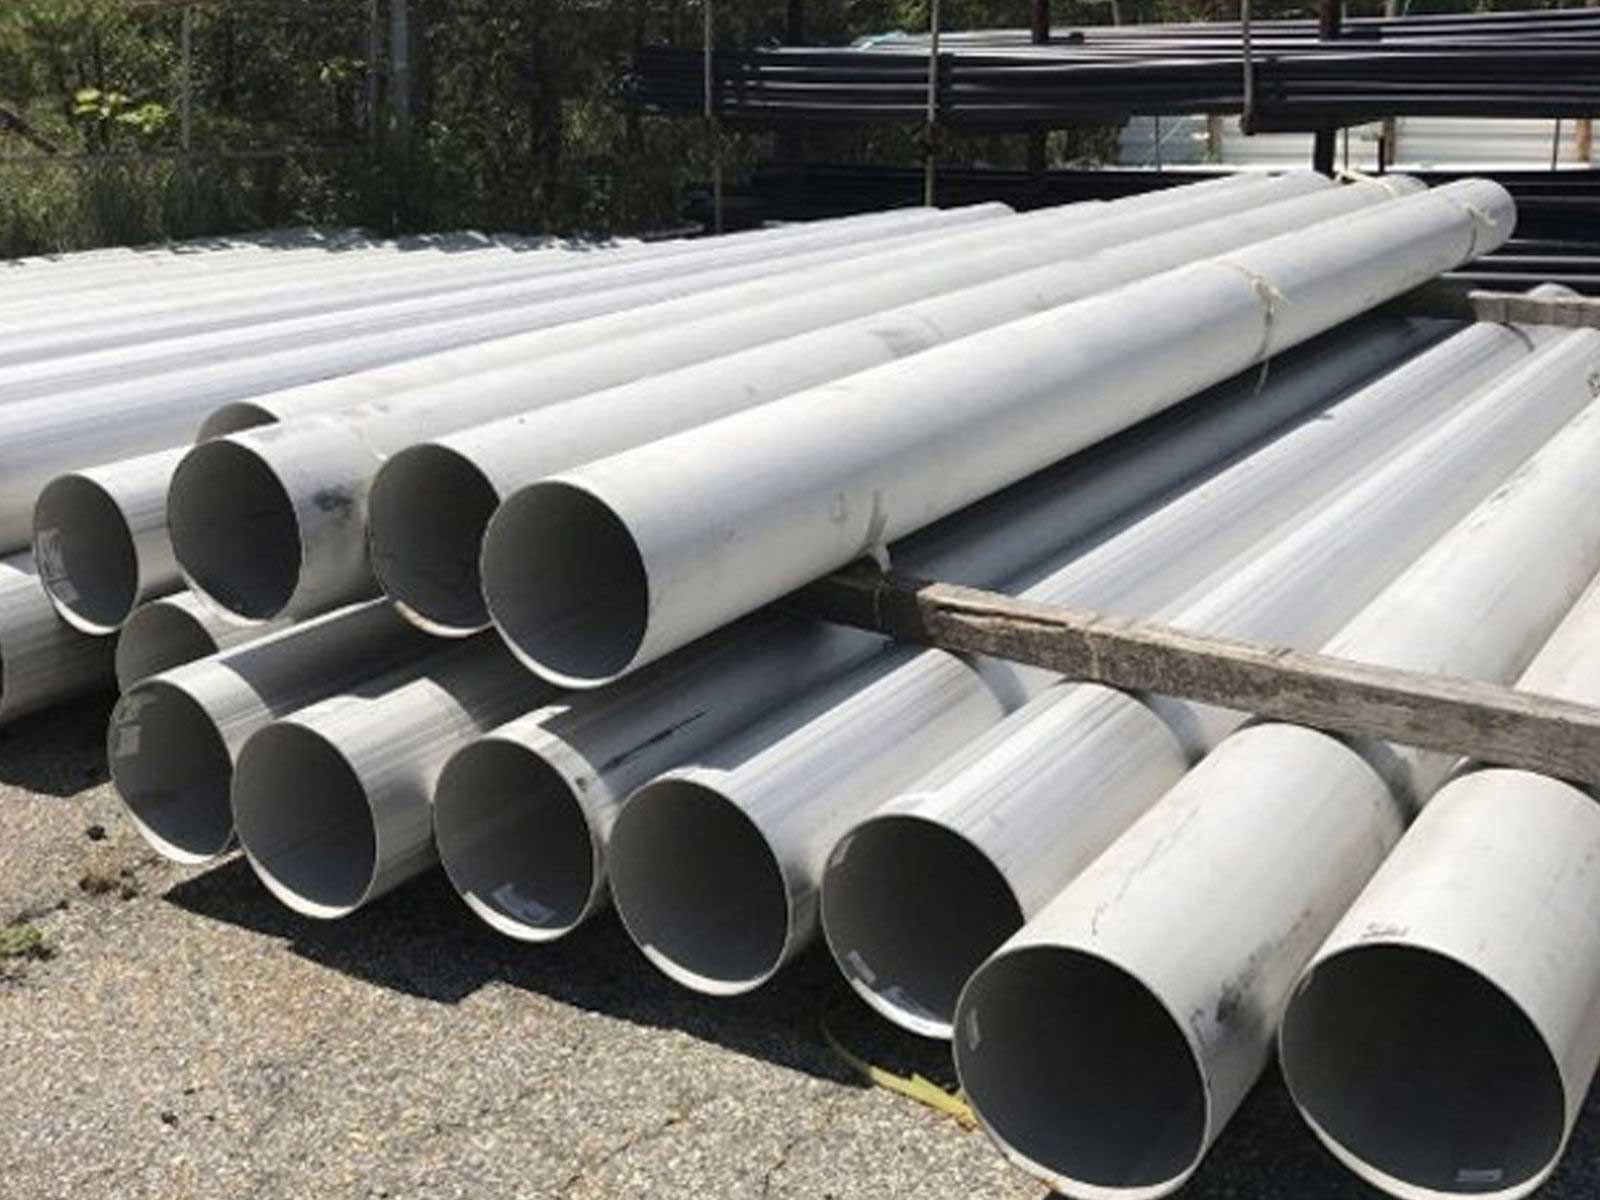 ChTPZ Group Develops New Type of Stainless Steel Pipes